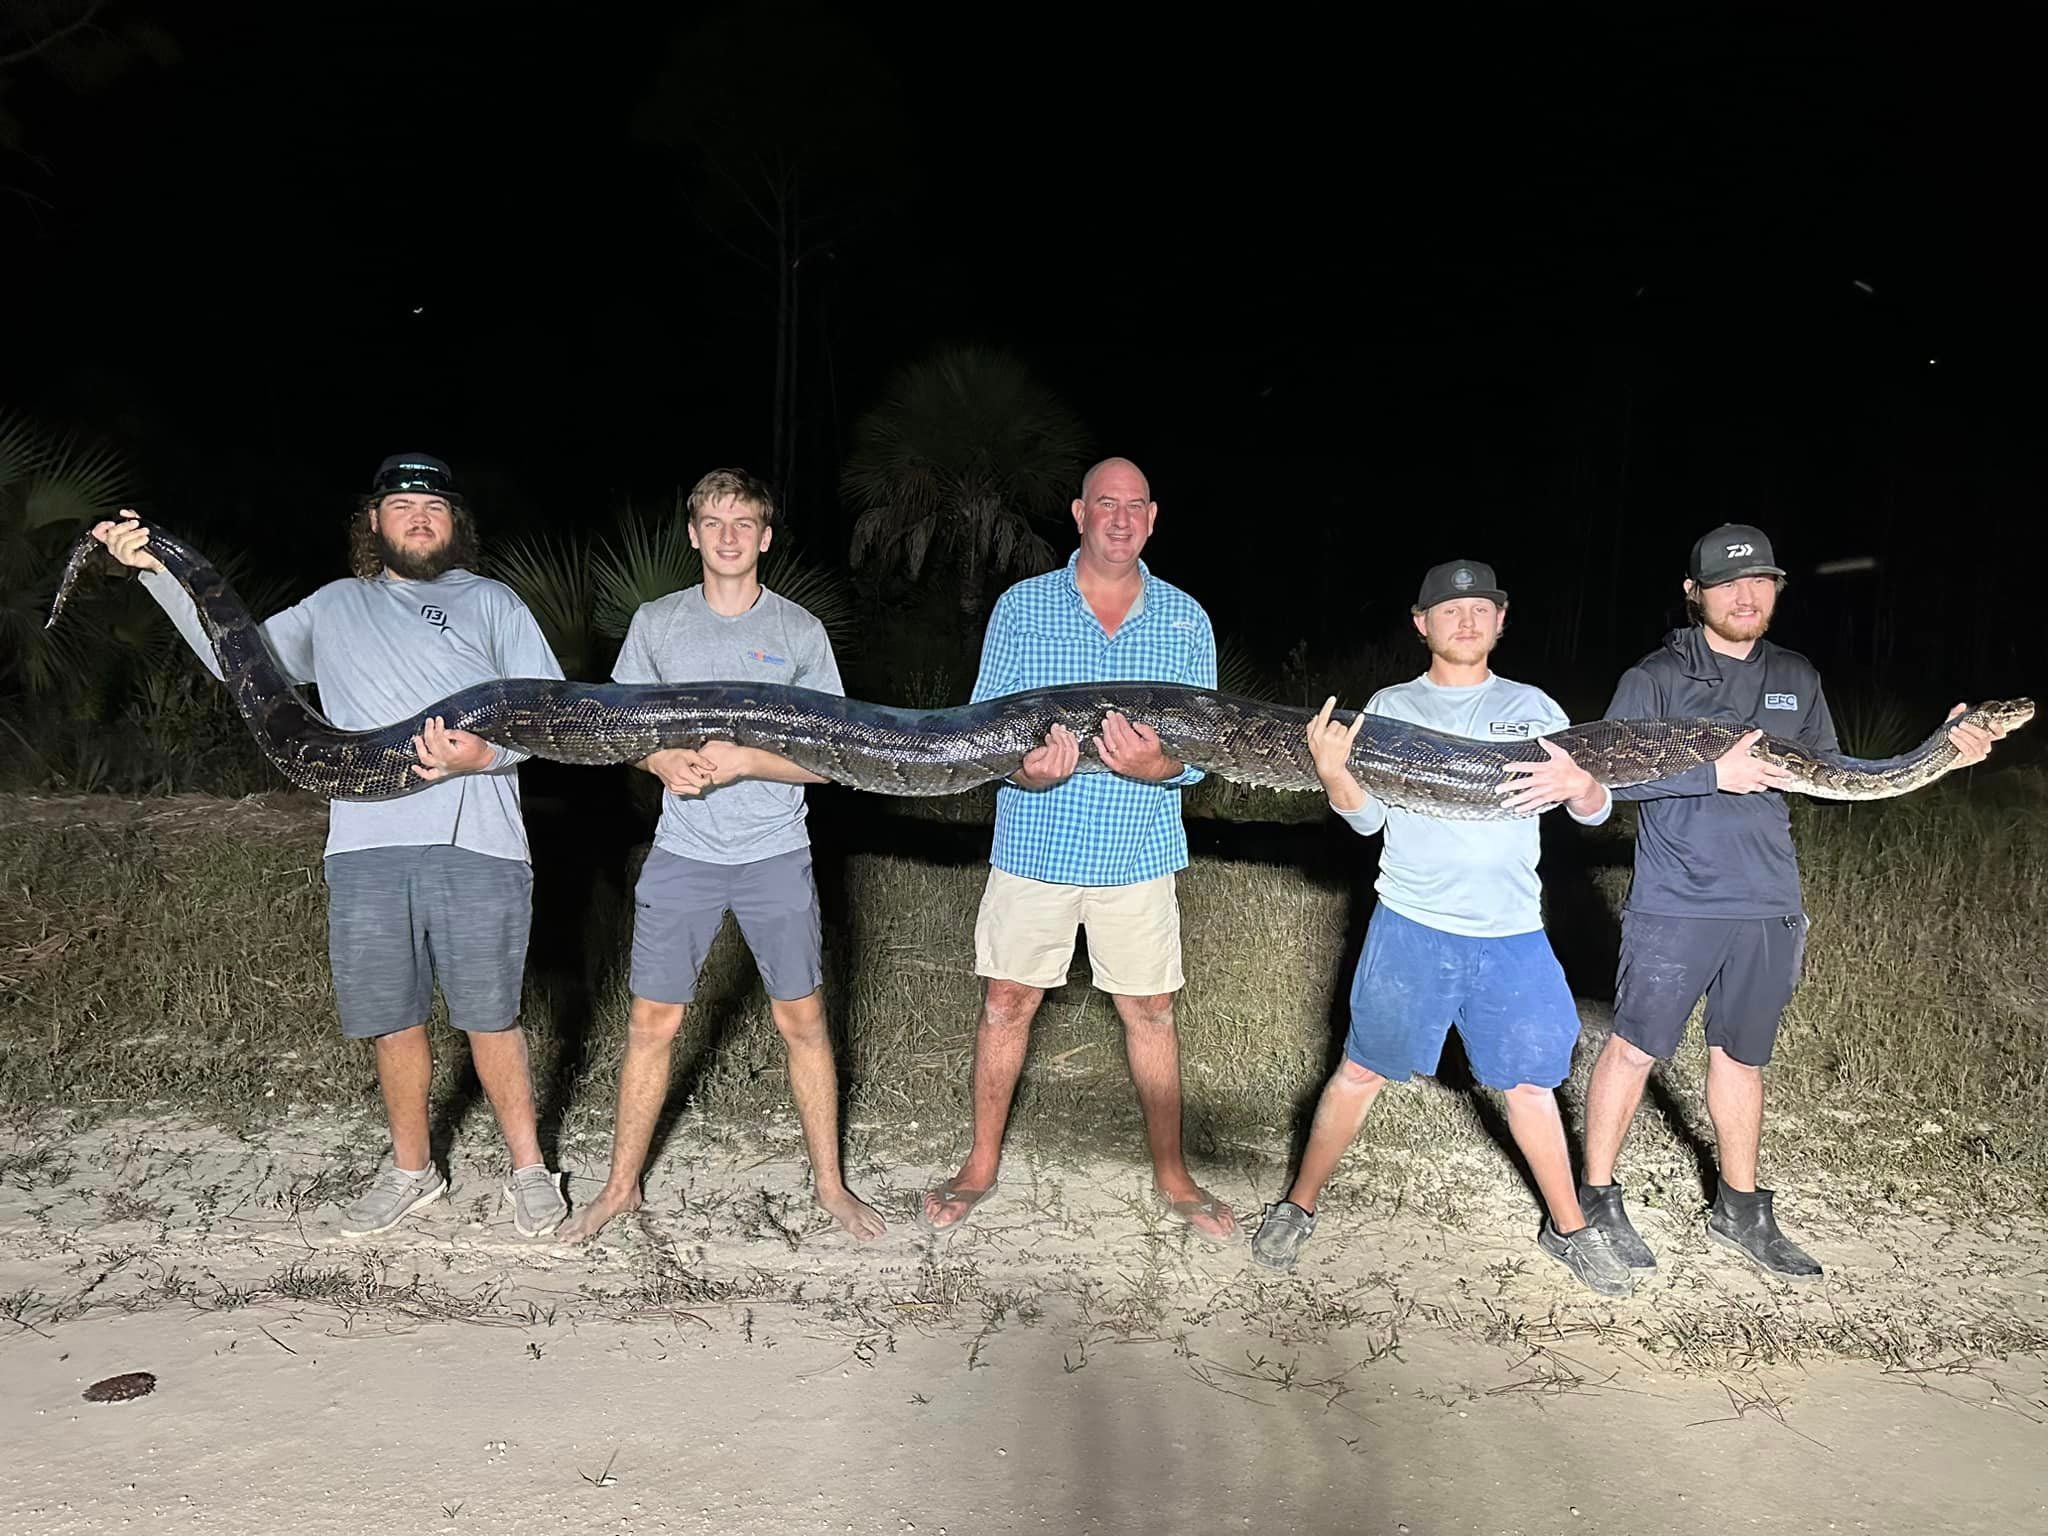 The snake weighed in at 198 pounds and measured 17 feet long